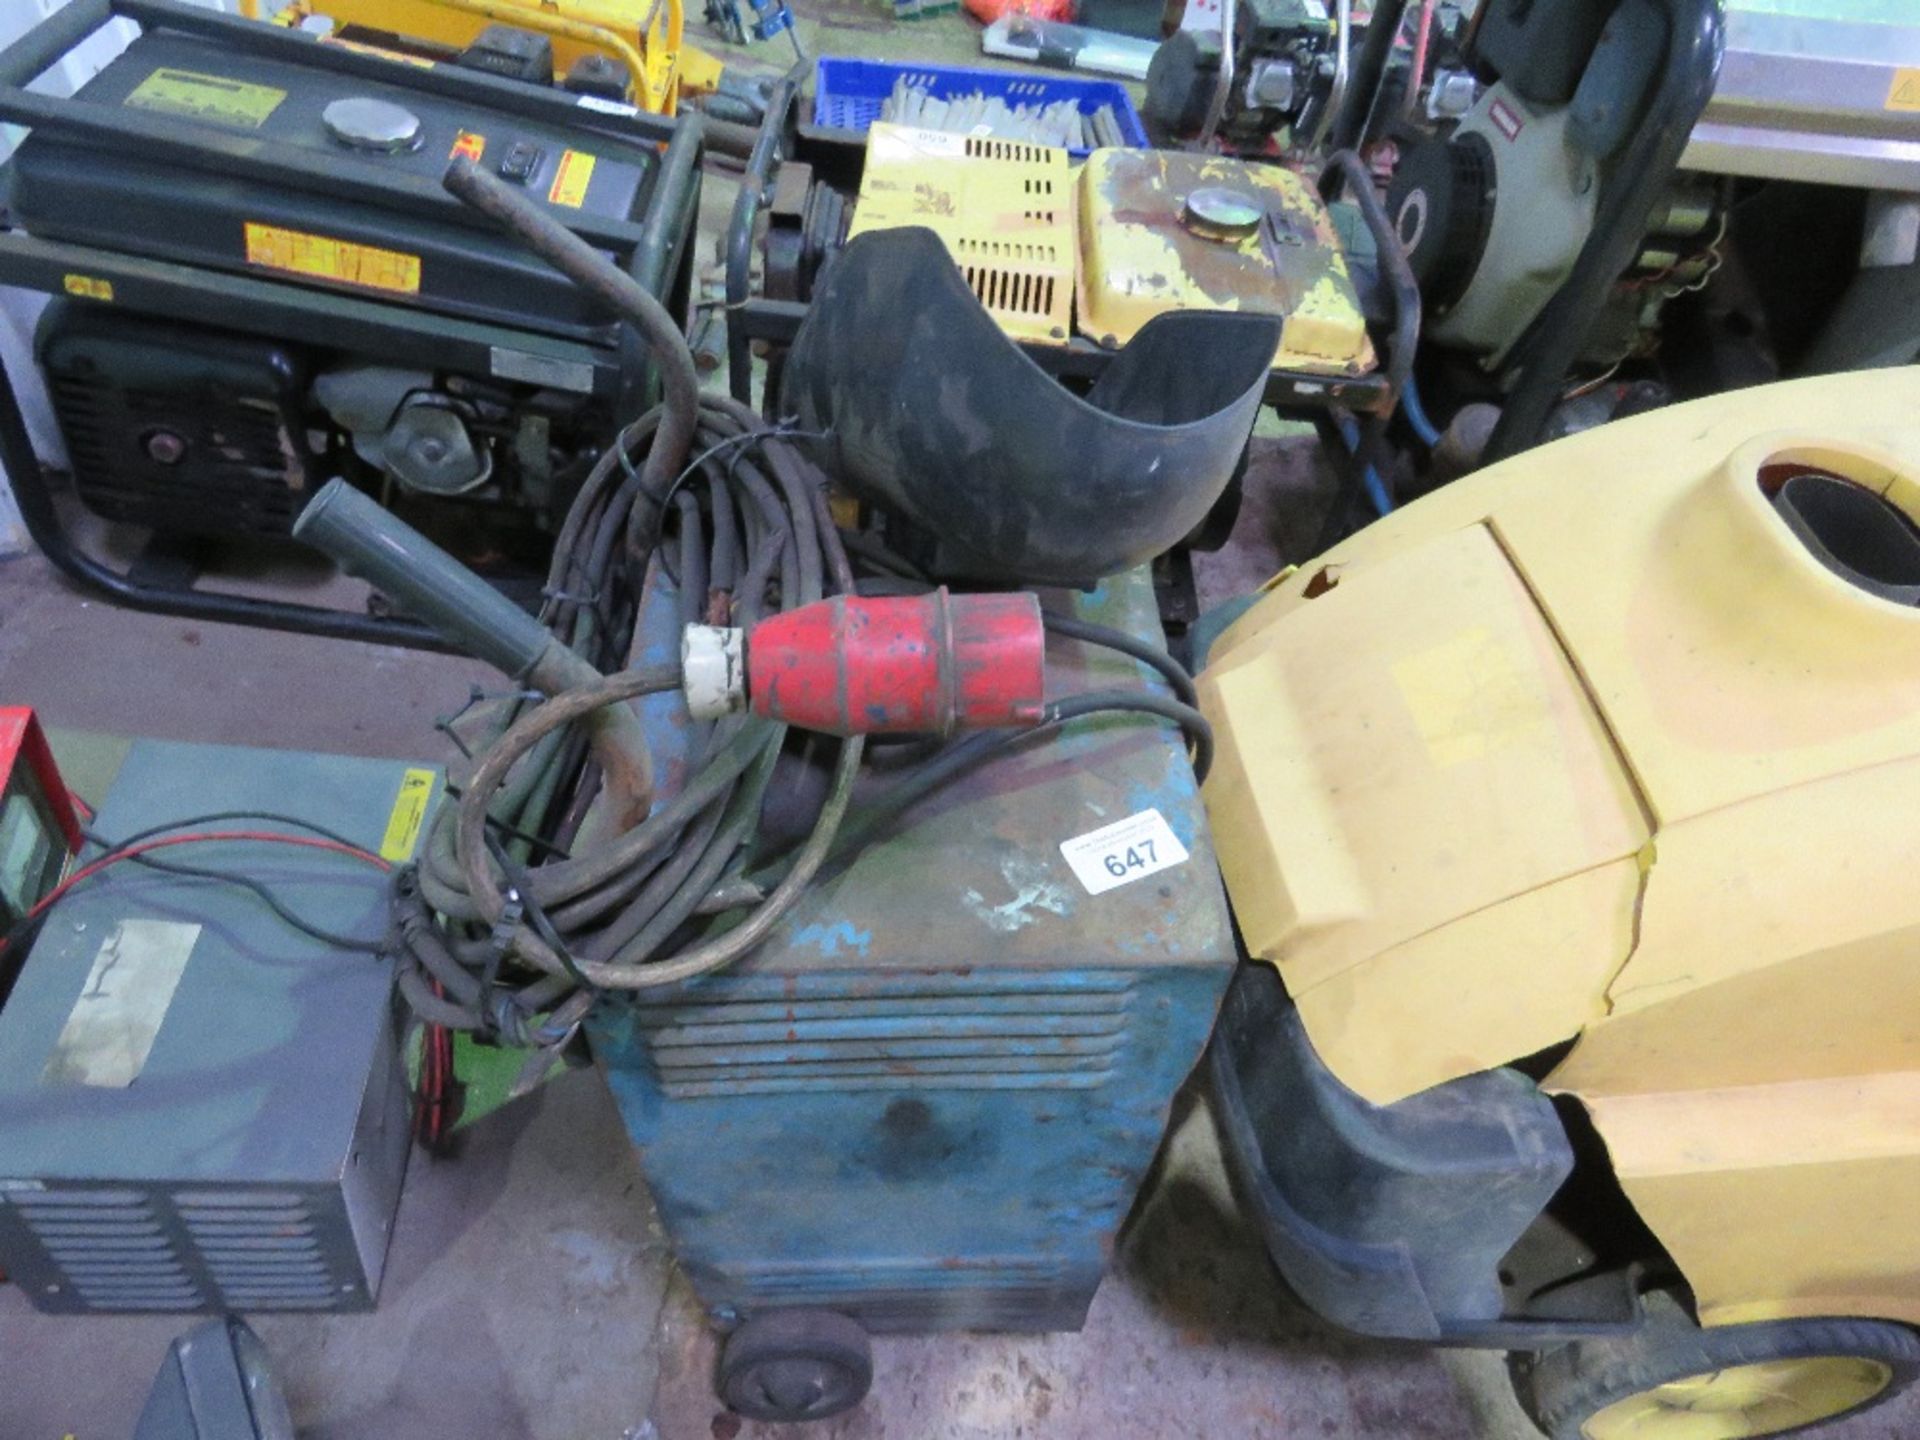 TURIO WELD 6 SINGLE/ 3 PHASE ARC WELDER. THIS LOT IS SOLD UNDER THE AUCTIONEERS MARGIN SCHEME, T - Image 3 of 3